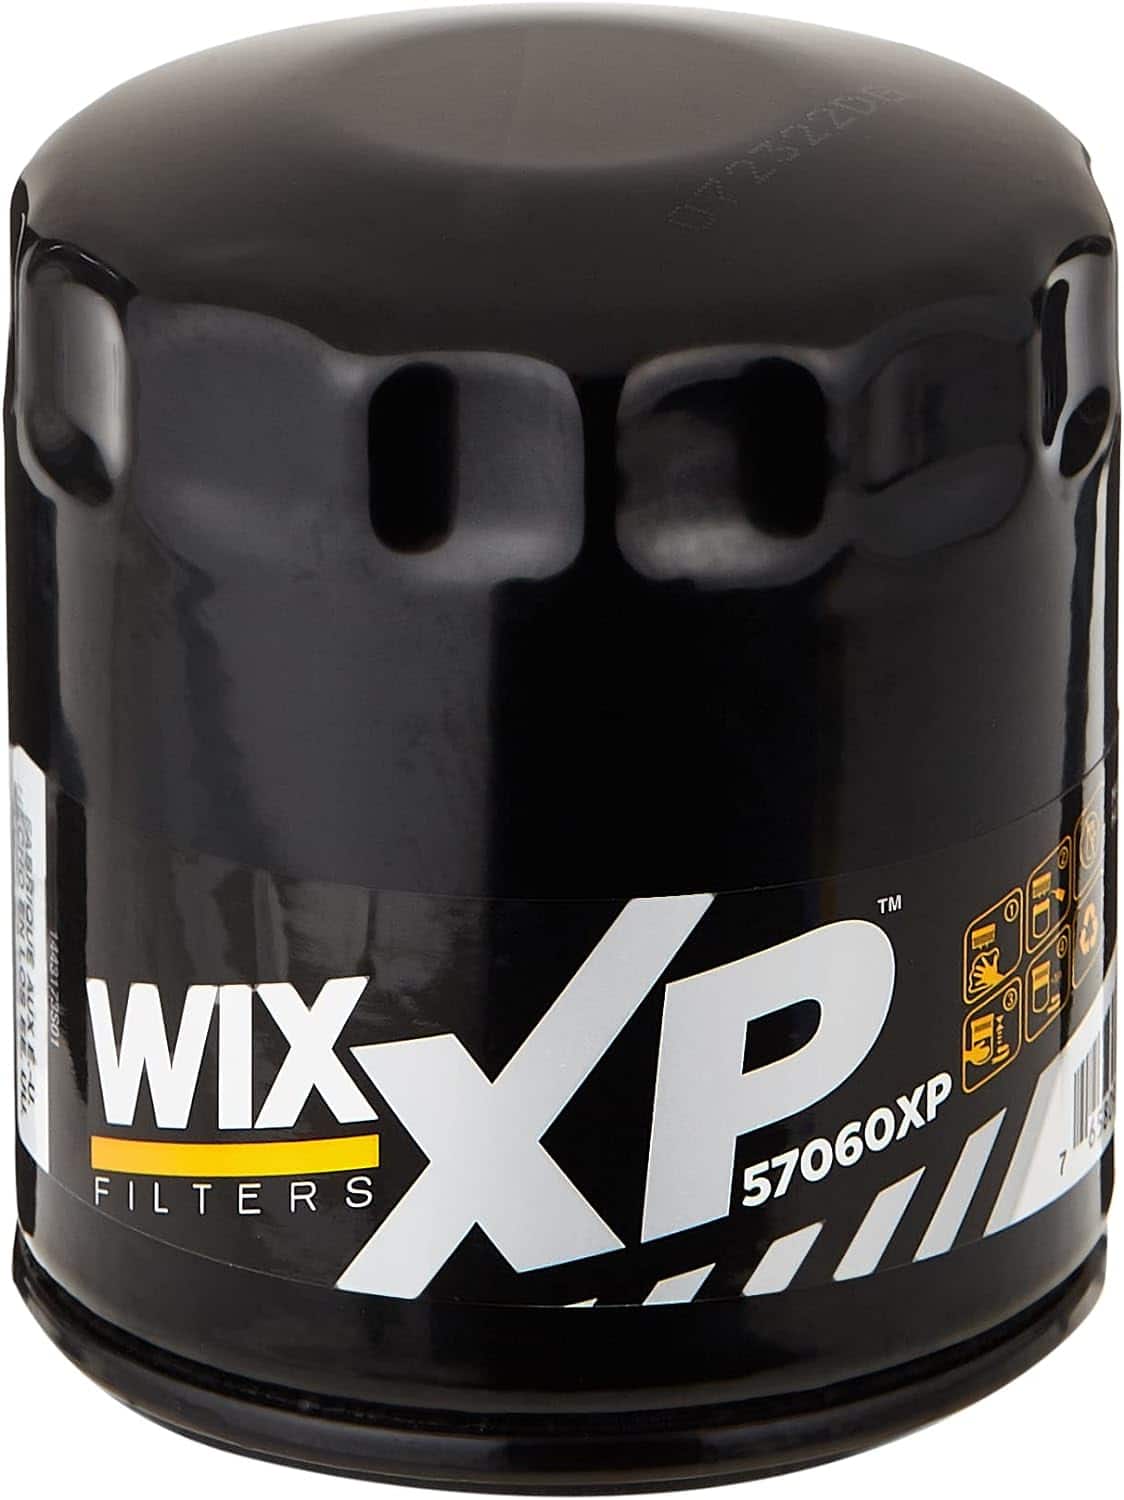 Wix Xp Oil Filter review